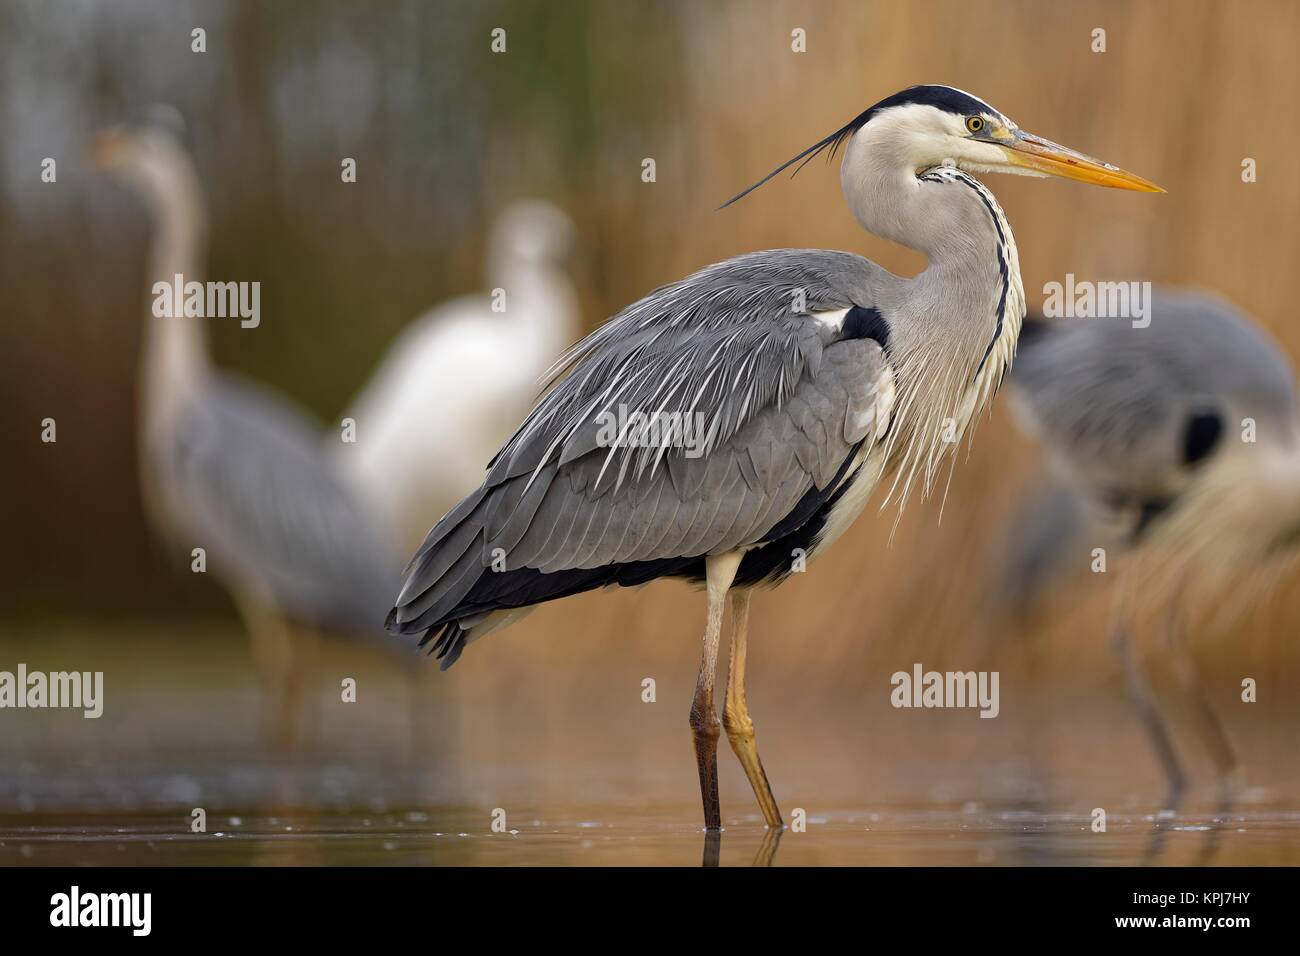 Grey heron (Ardea cinerea), stands in the water, National Park Kiskunsag, Hungary Stock Photo